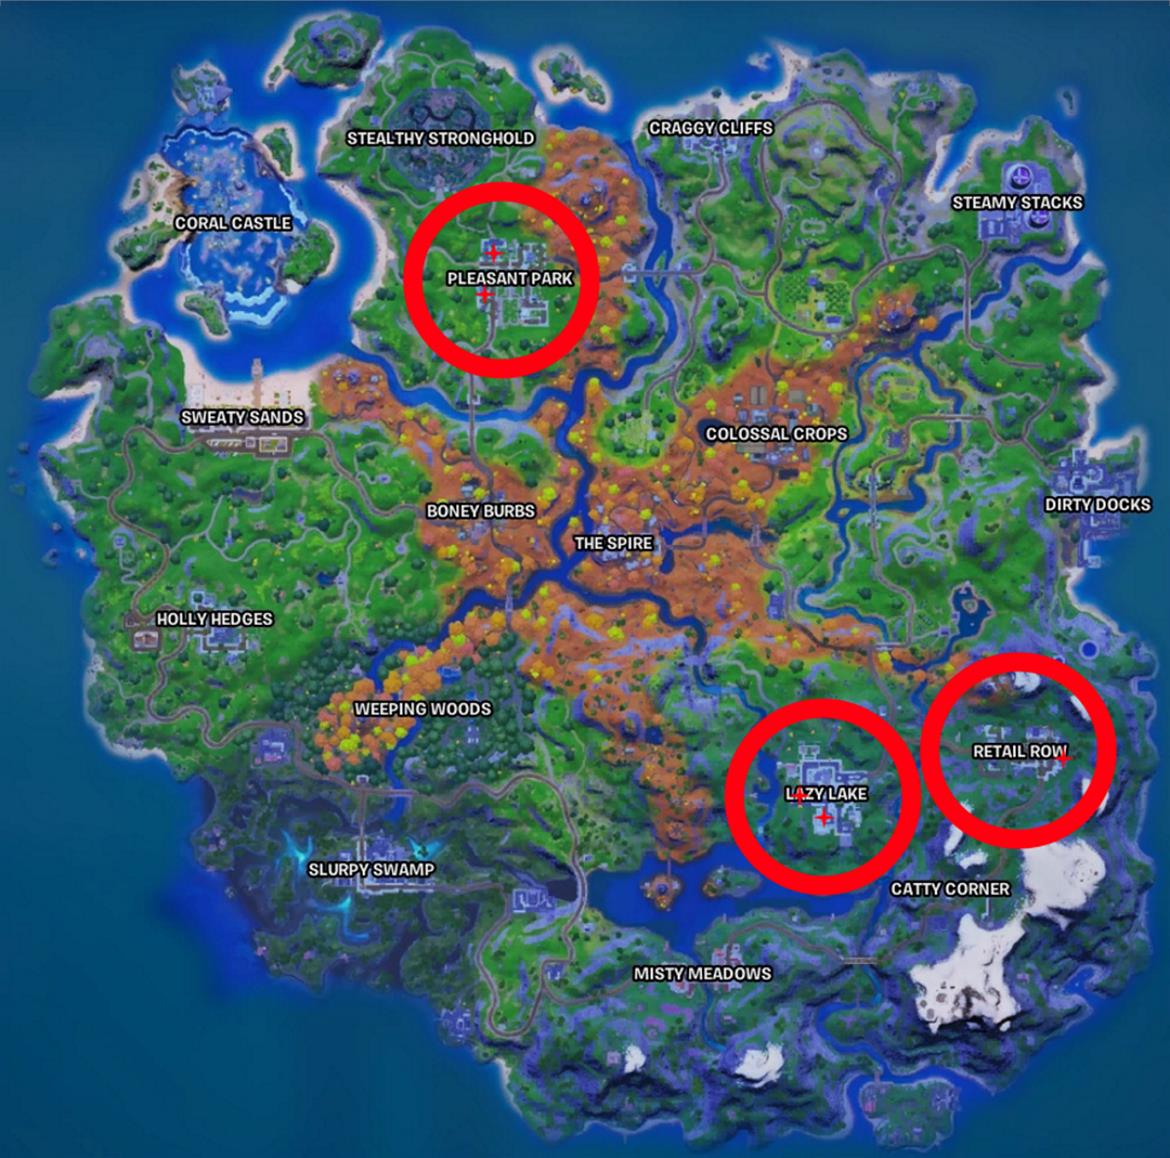 Where To Find Fortnite Literature Samples In Pleasant Park, Lazy Lake, And Retail Row